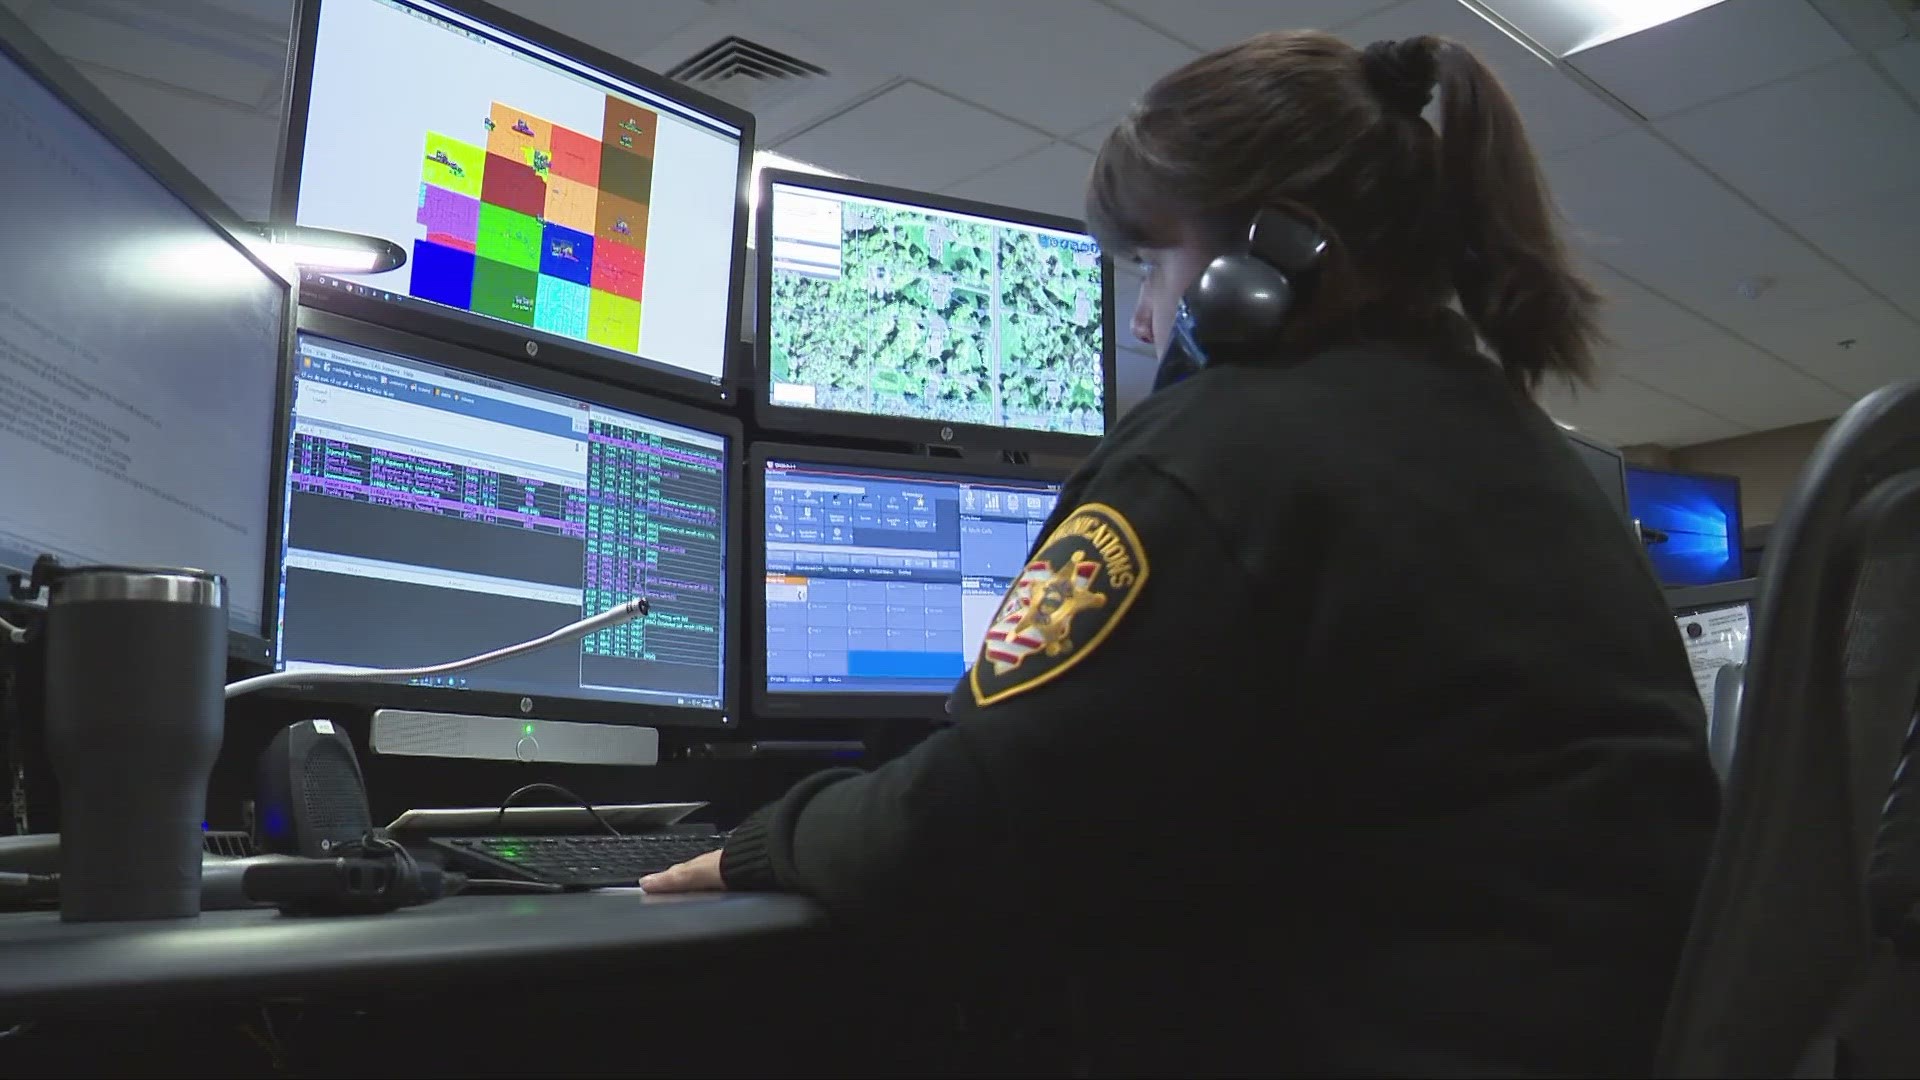 Lorain County is dealing with a critical problem as there are not enough 911 dispatchers to fill all of the open slots.